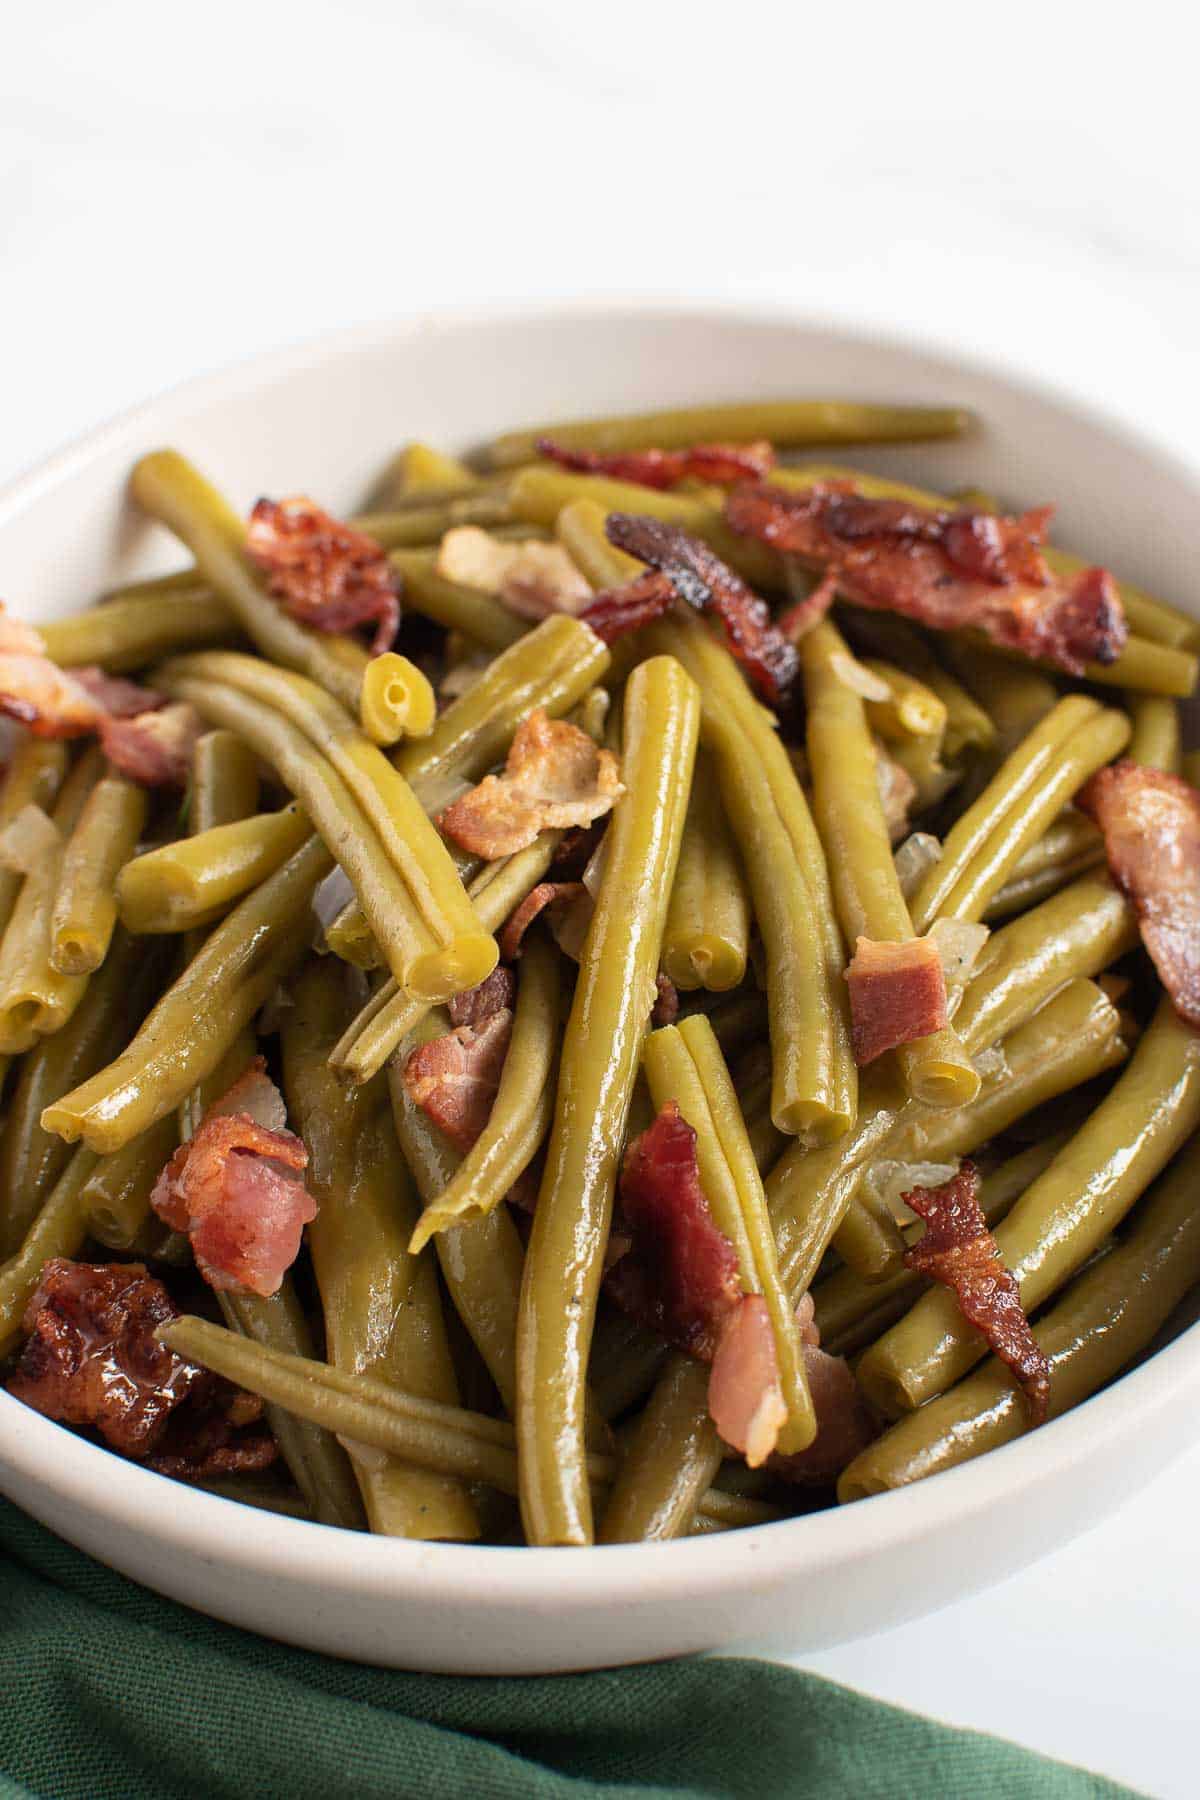 https://www.hintofhealthy.com/wp-content/uploads/2021/10/Slow-Cooker-Green-Beans-2-1.jpg